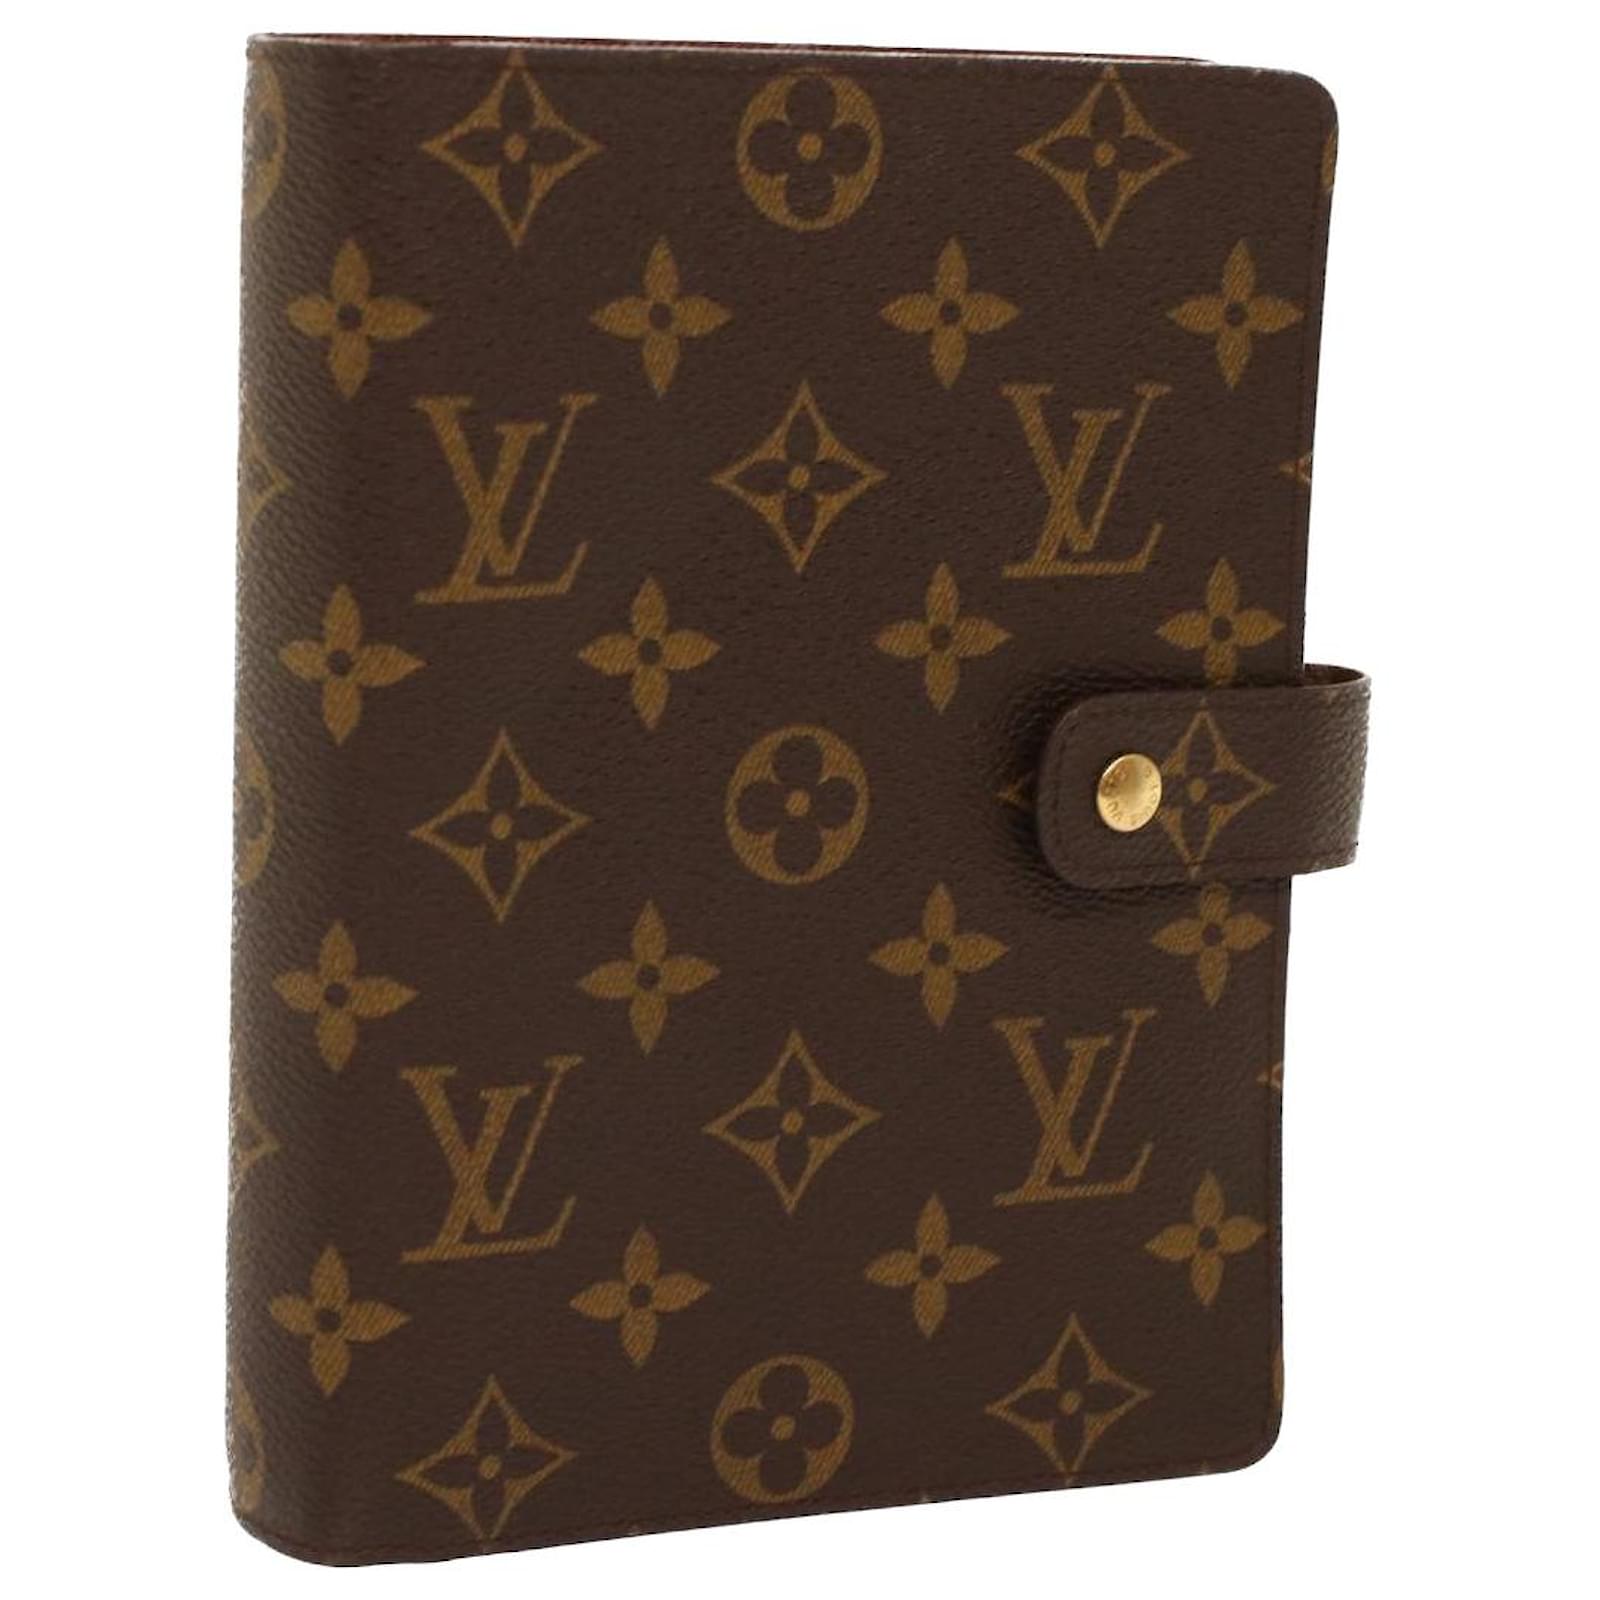 Wholesale agenda cover louis vuitton With Elaborate Features 